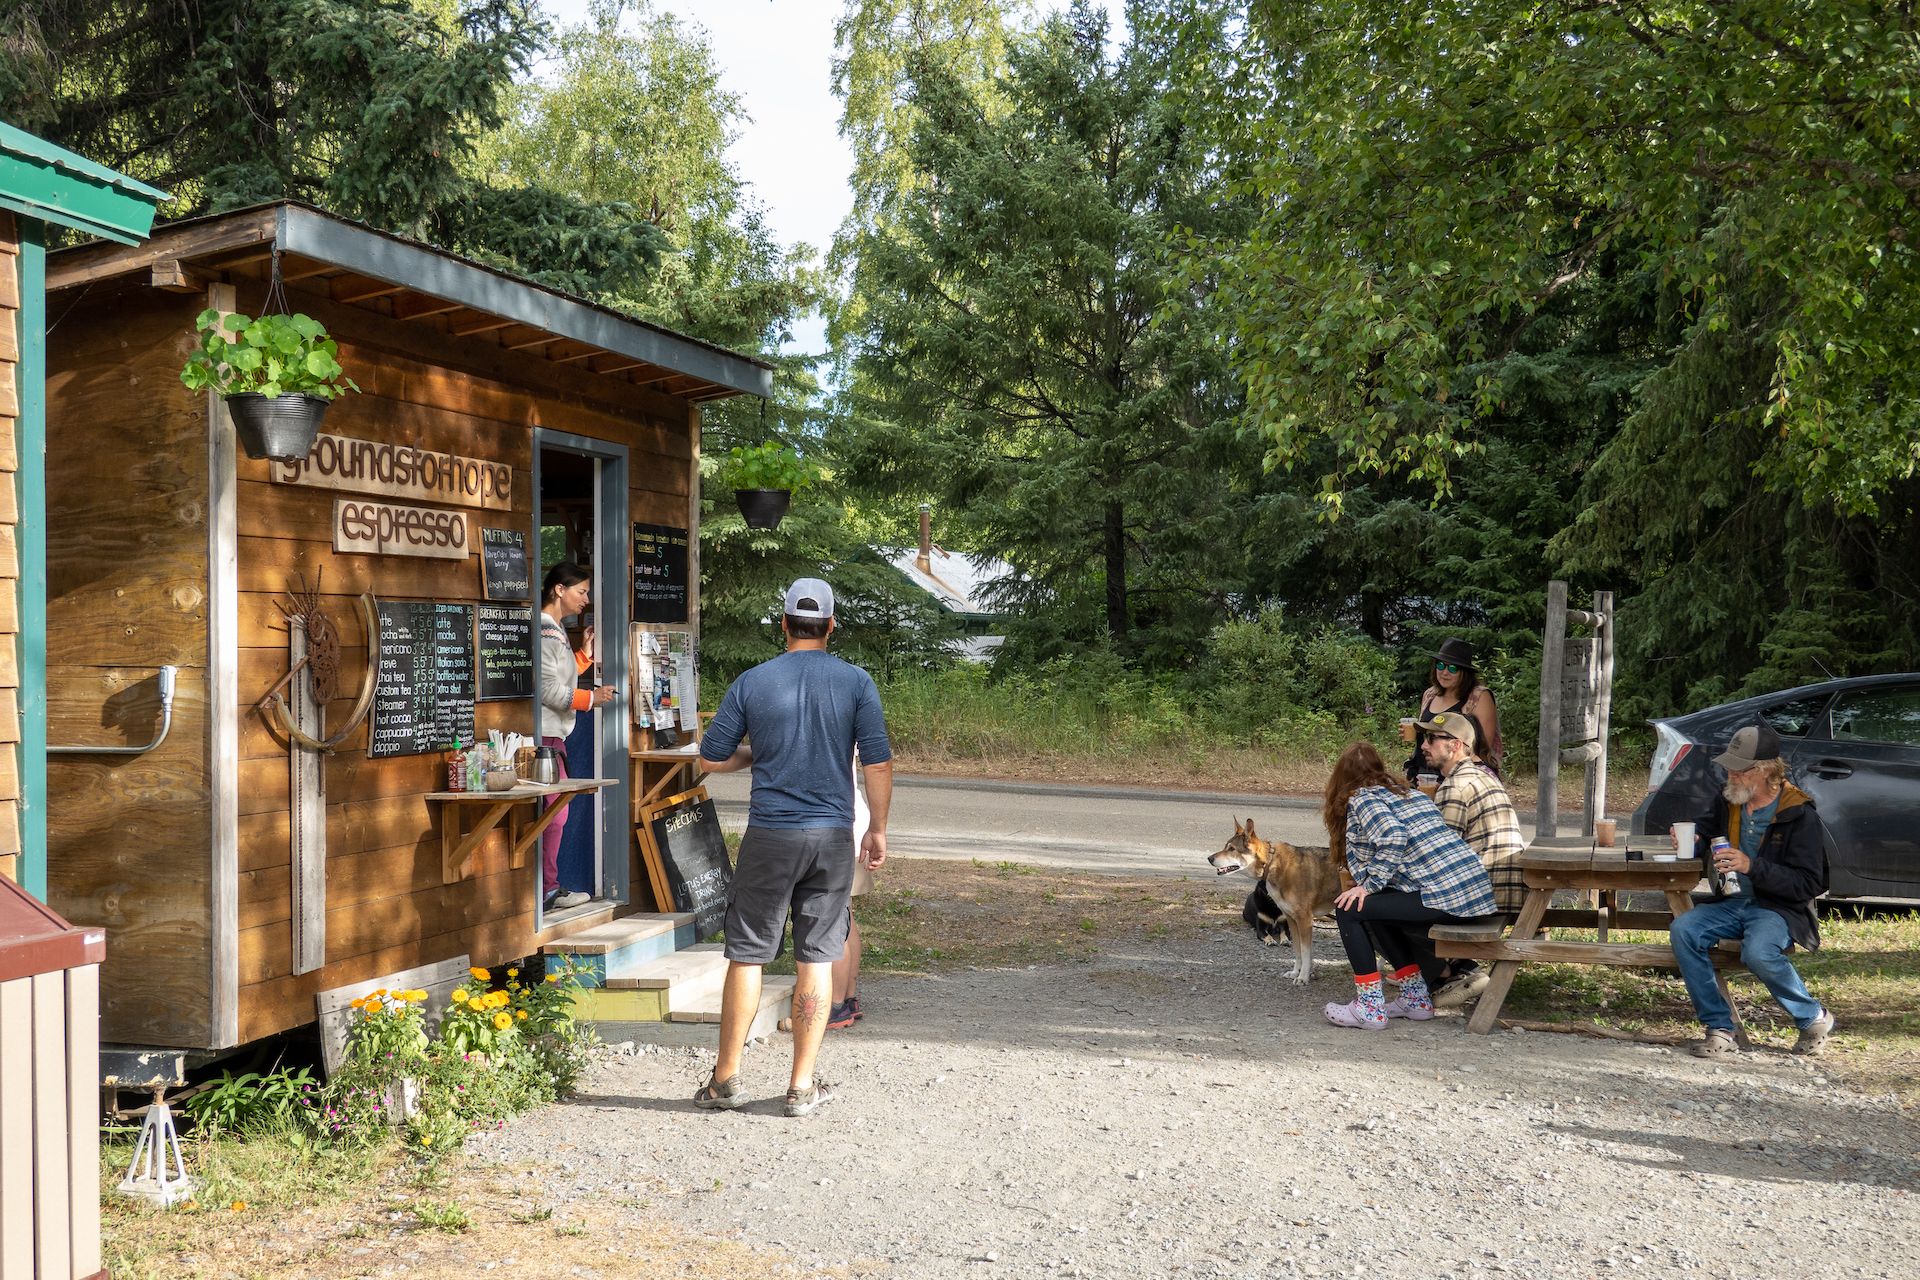 Breakfast burritos and coffees for everyone at the cute coffeeshop near our campground